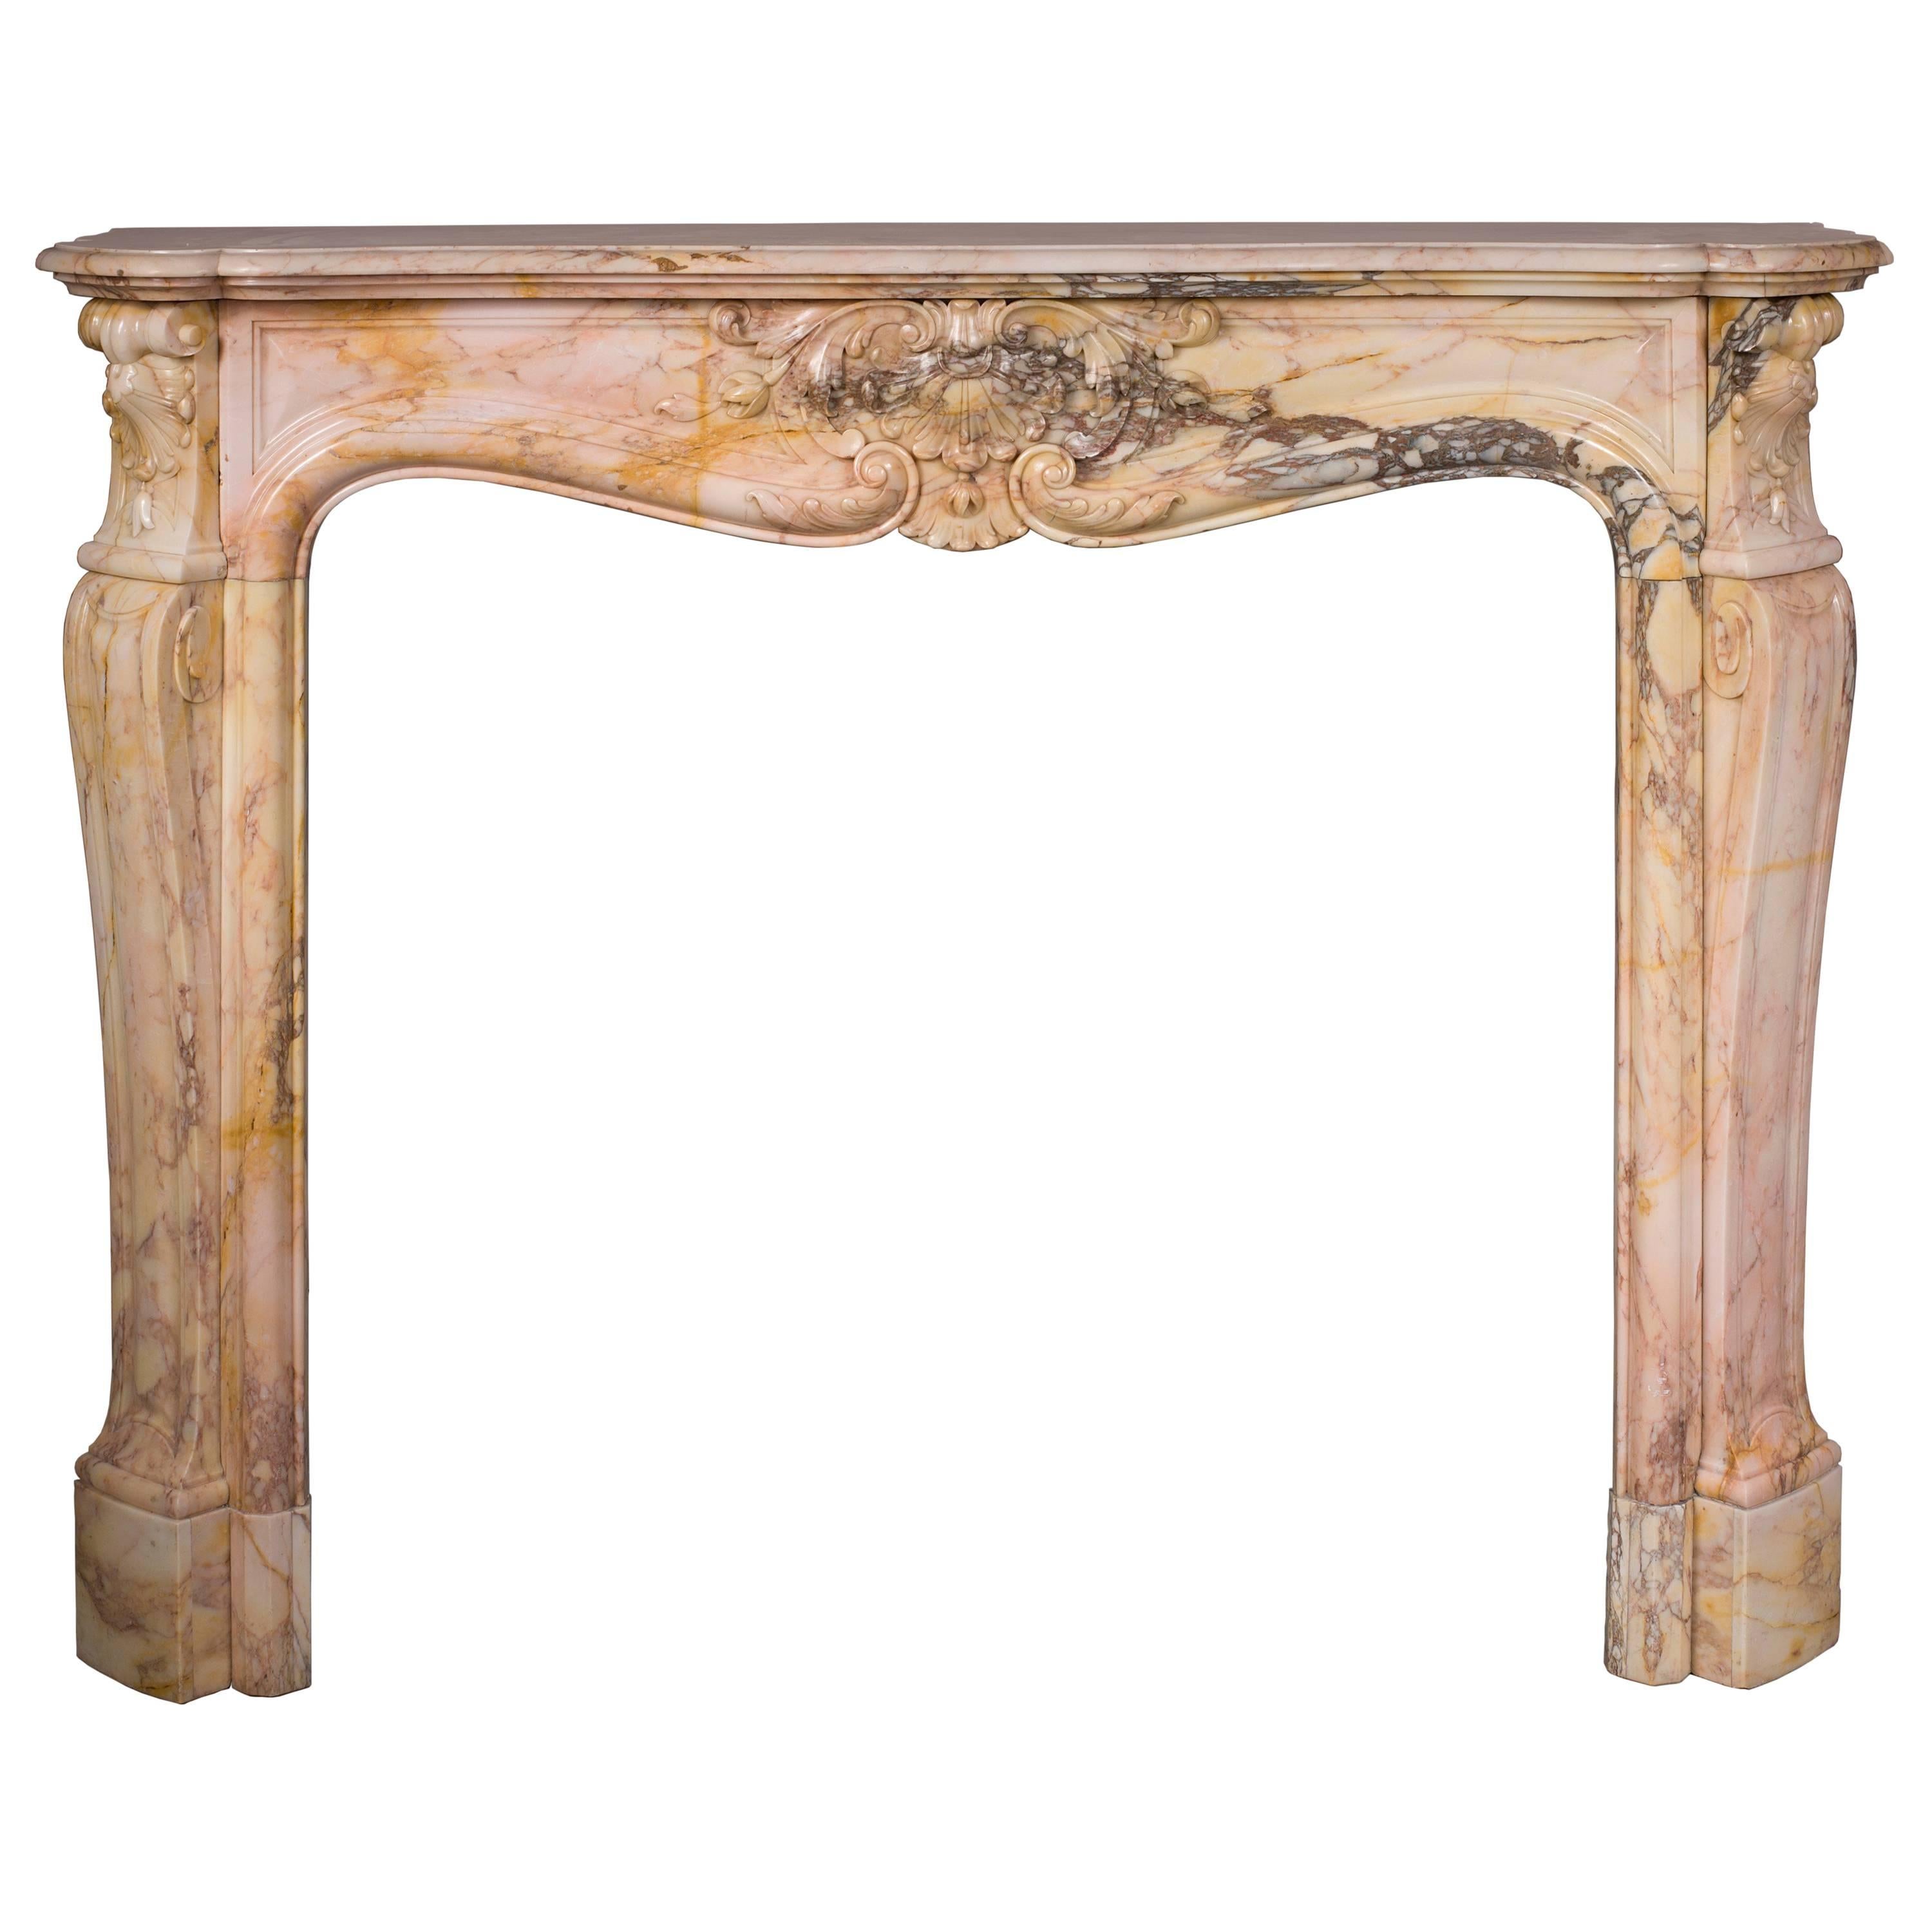 Three Shells Louis XV Style Fireplace in Breccia Nuvolata Marble, 19th Century For Sale